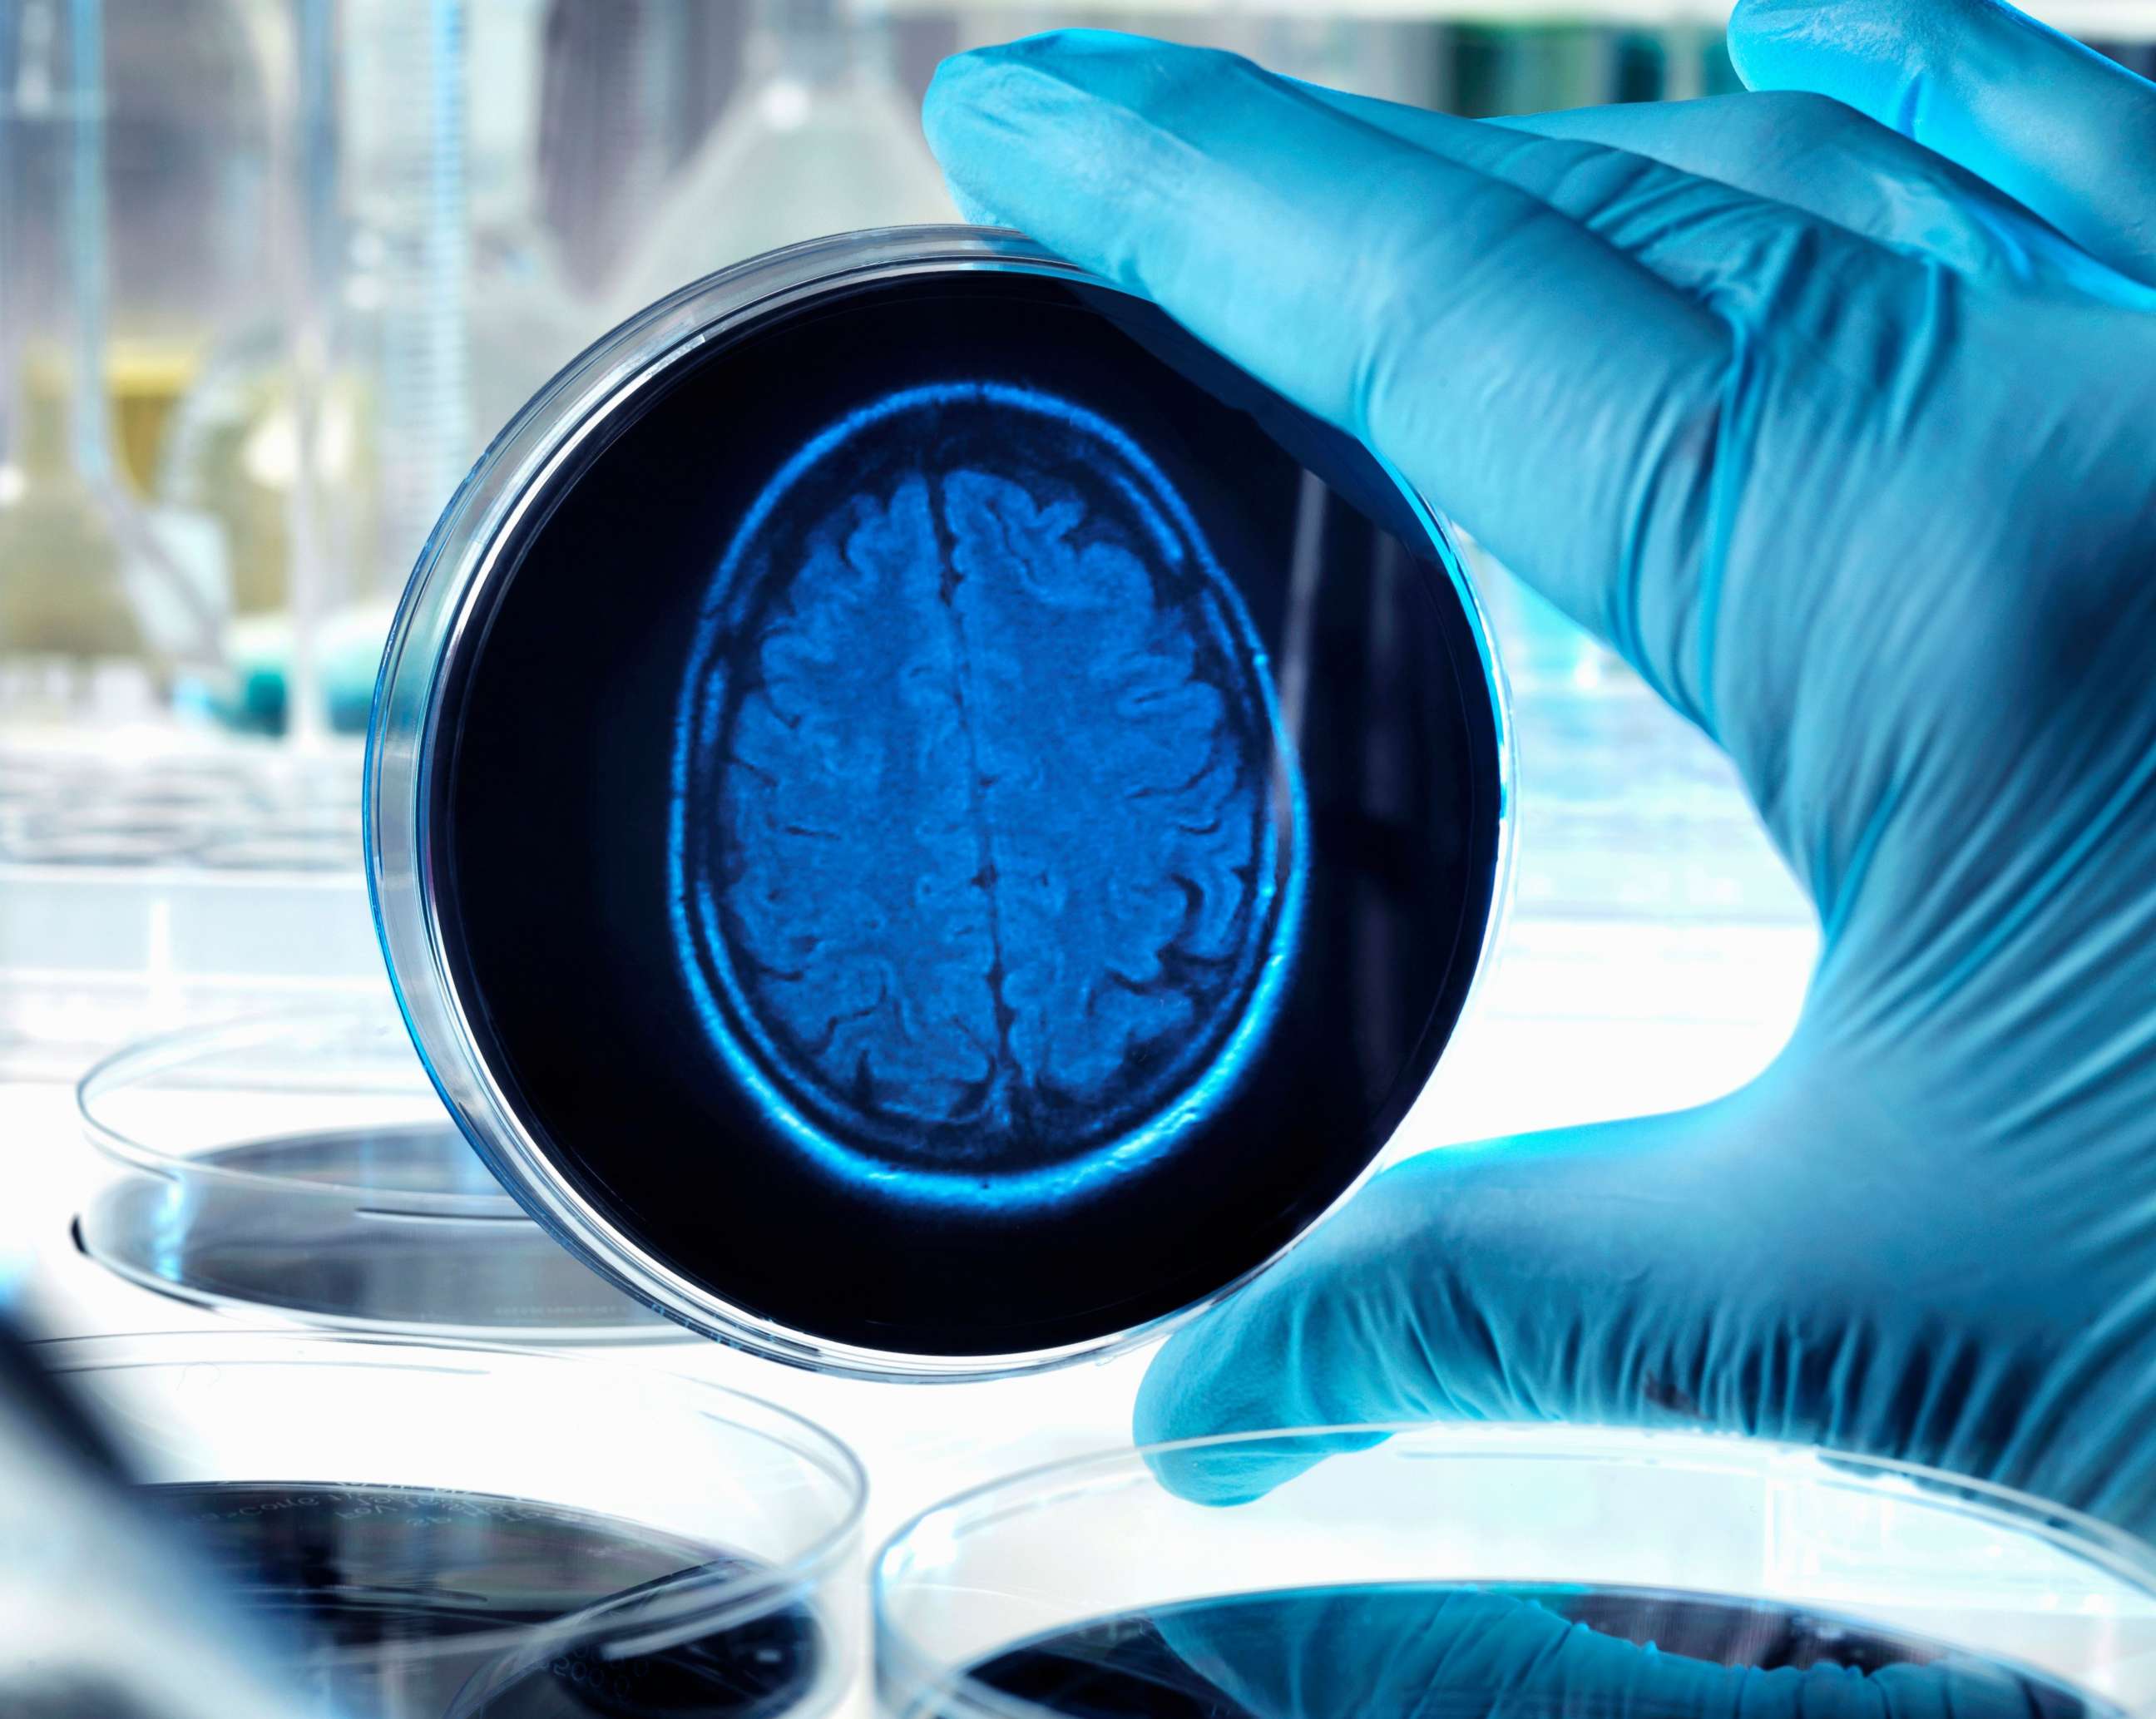 PHOTO: A stock image depicts a brain scan in a dish.